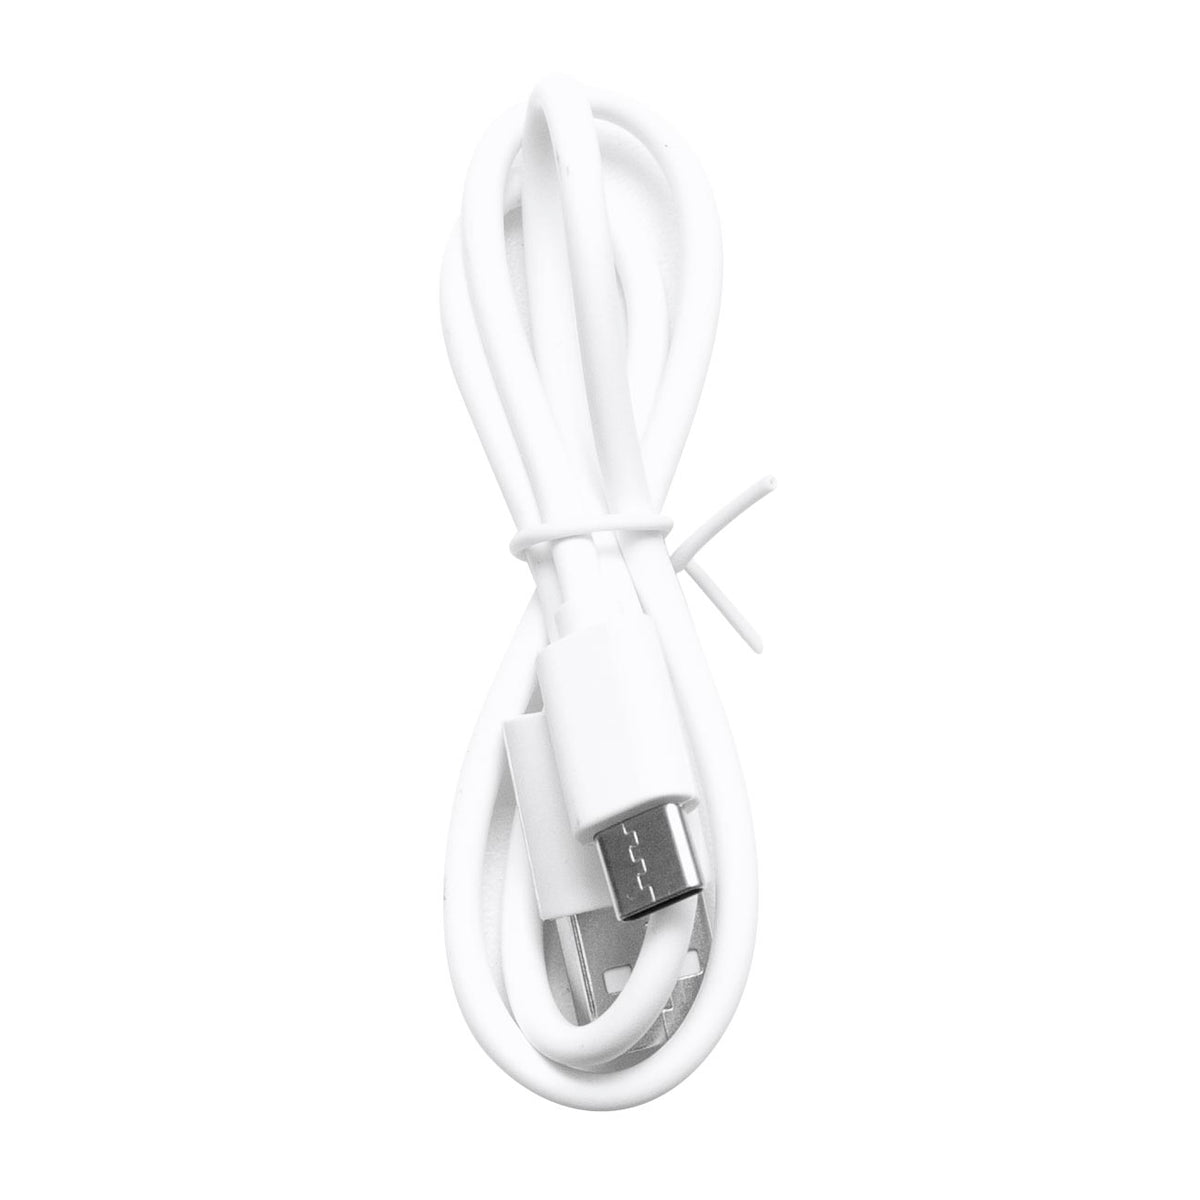 #6613 - USB-C Charging Cable